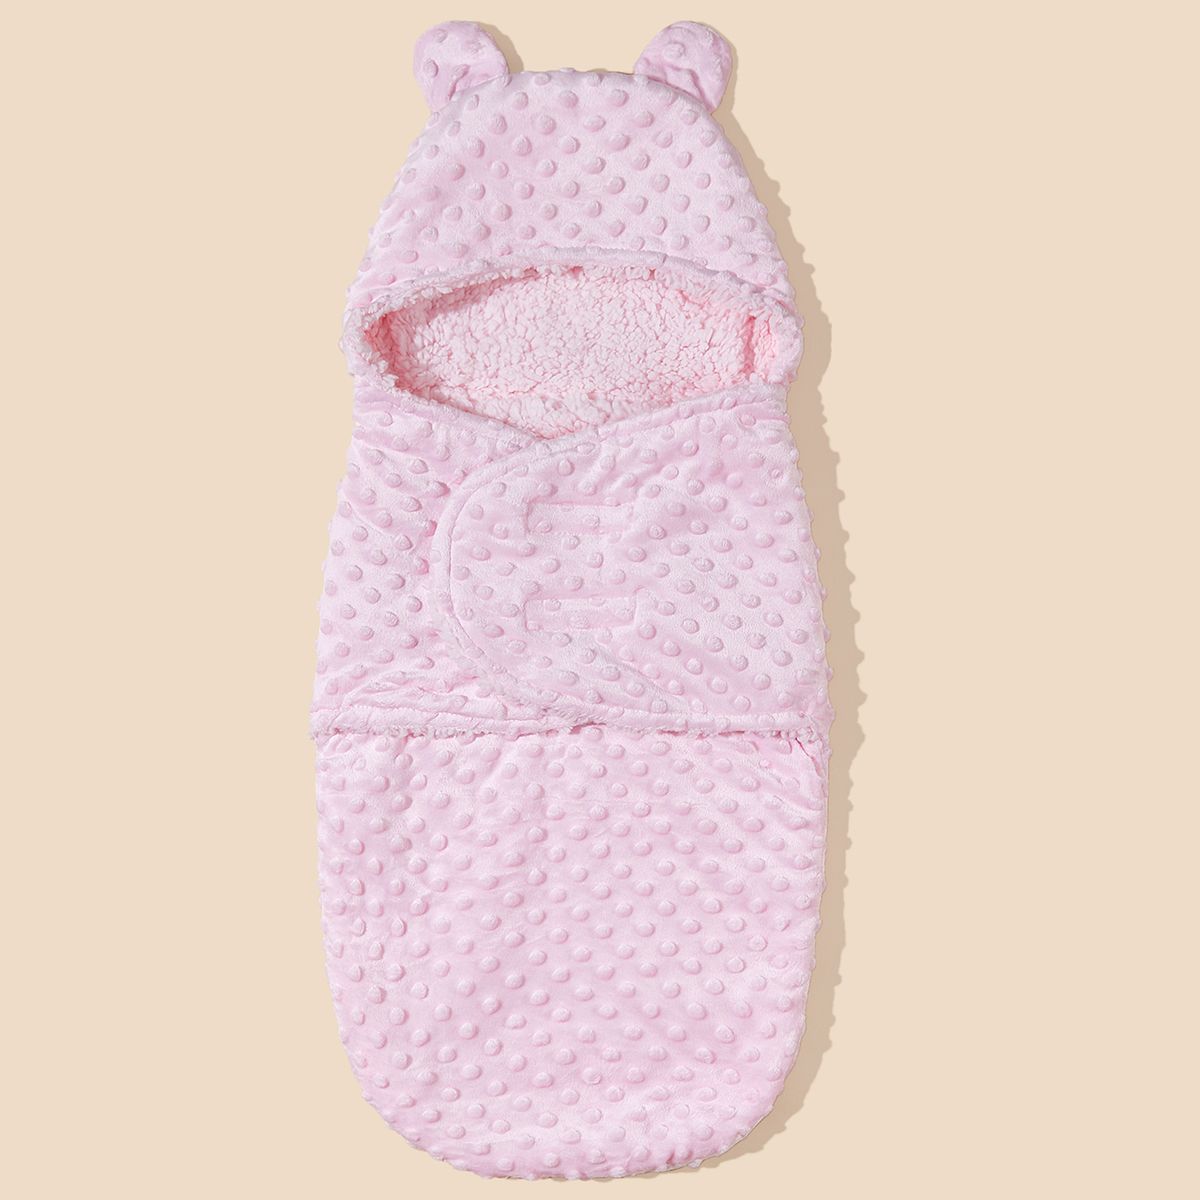 Newborn Baby Hooded Sleep Sack In Autumn And Winter: Made With Soft Velvet Material For Babies Up To 3 Months